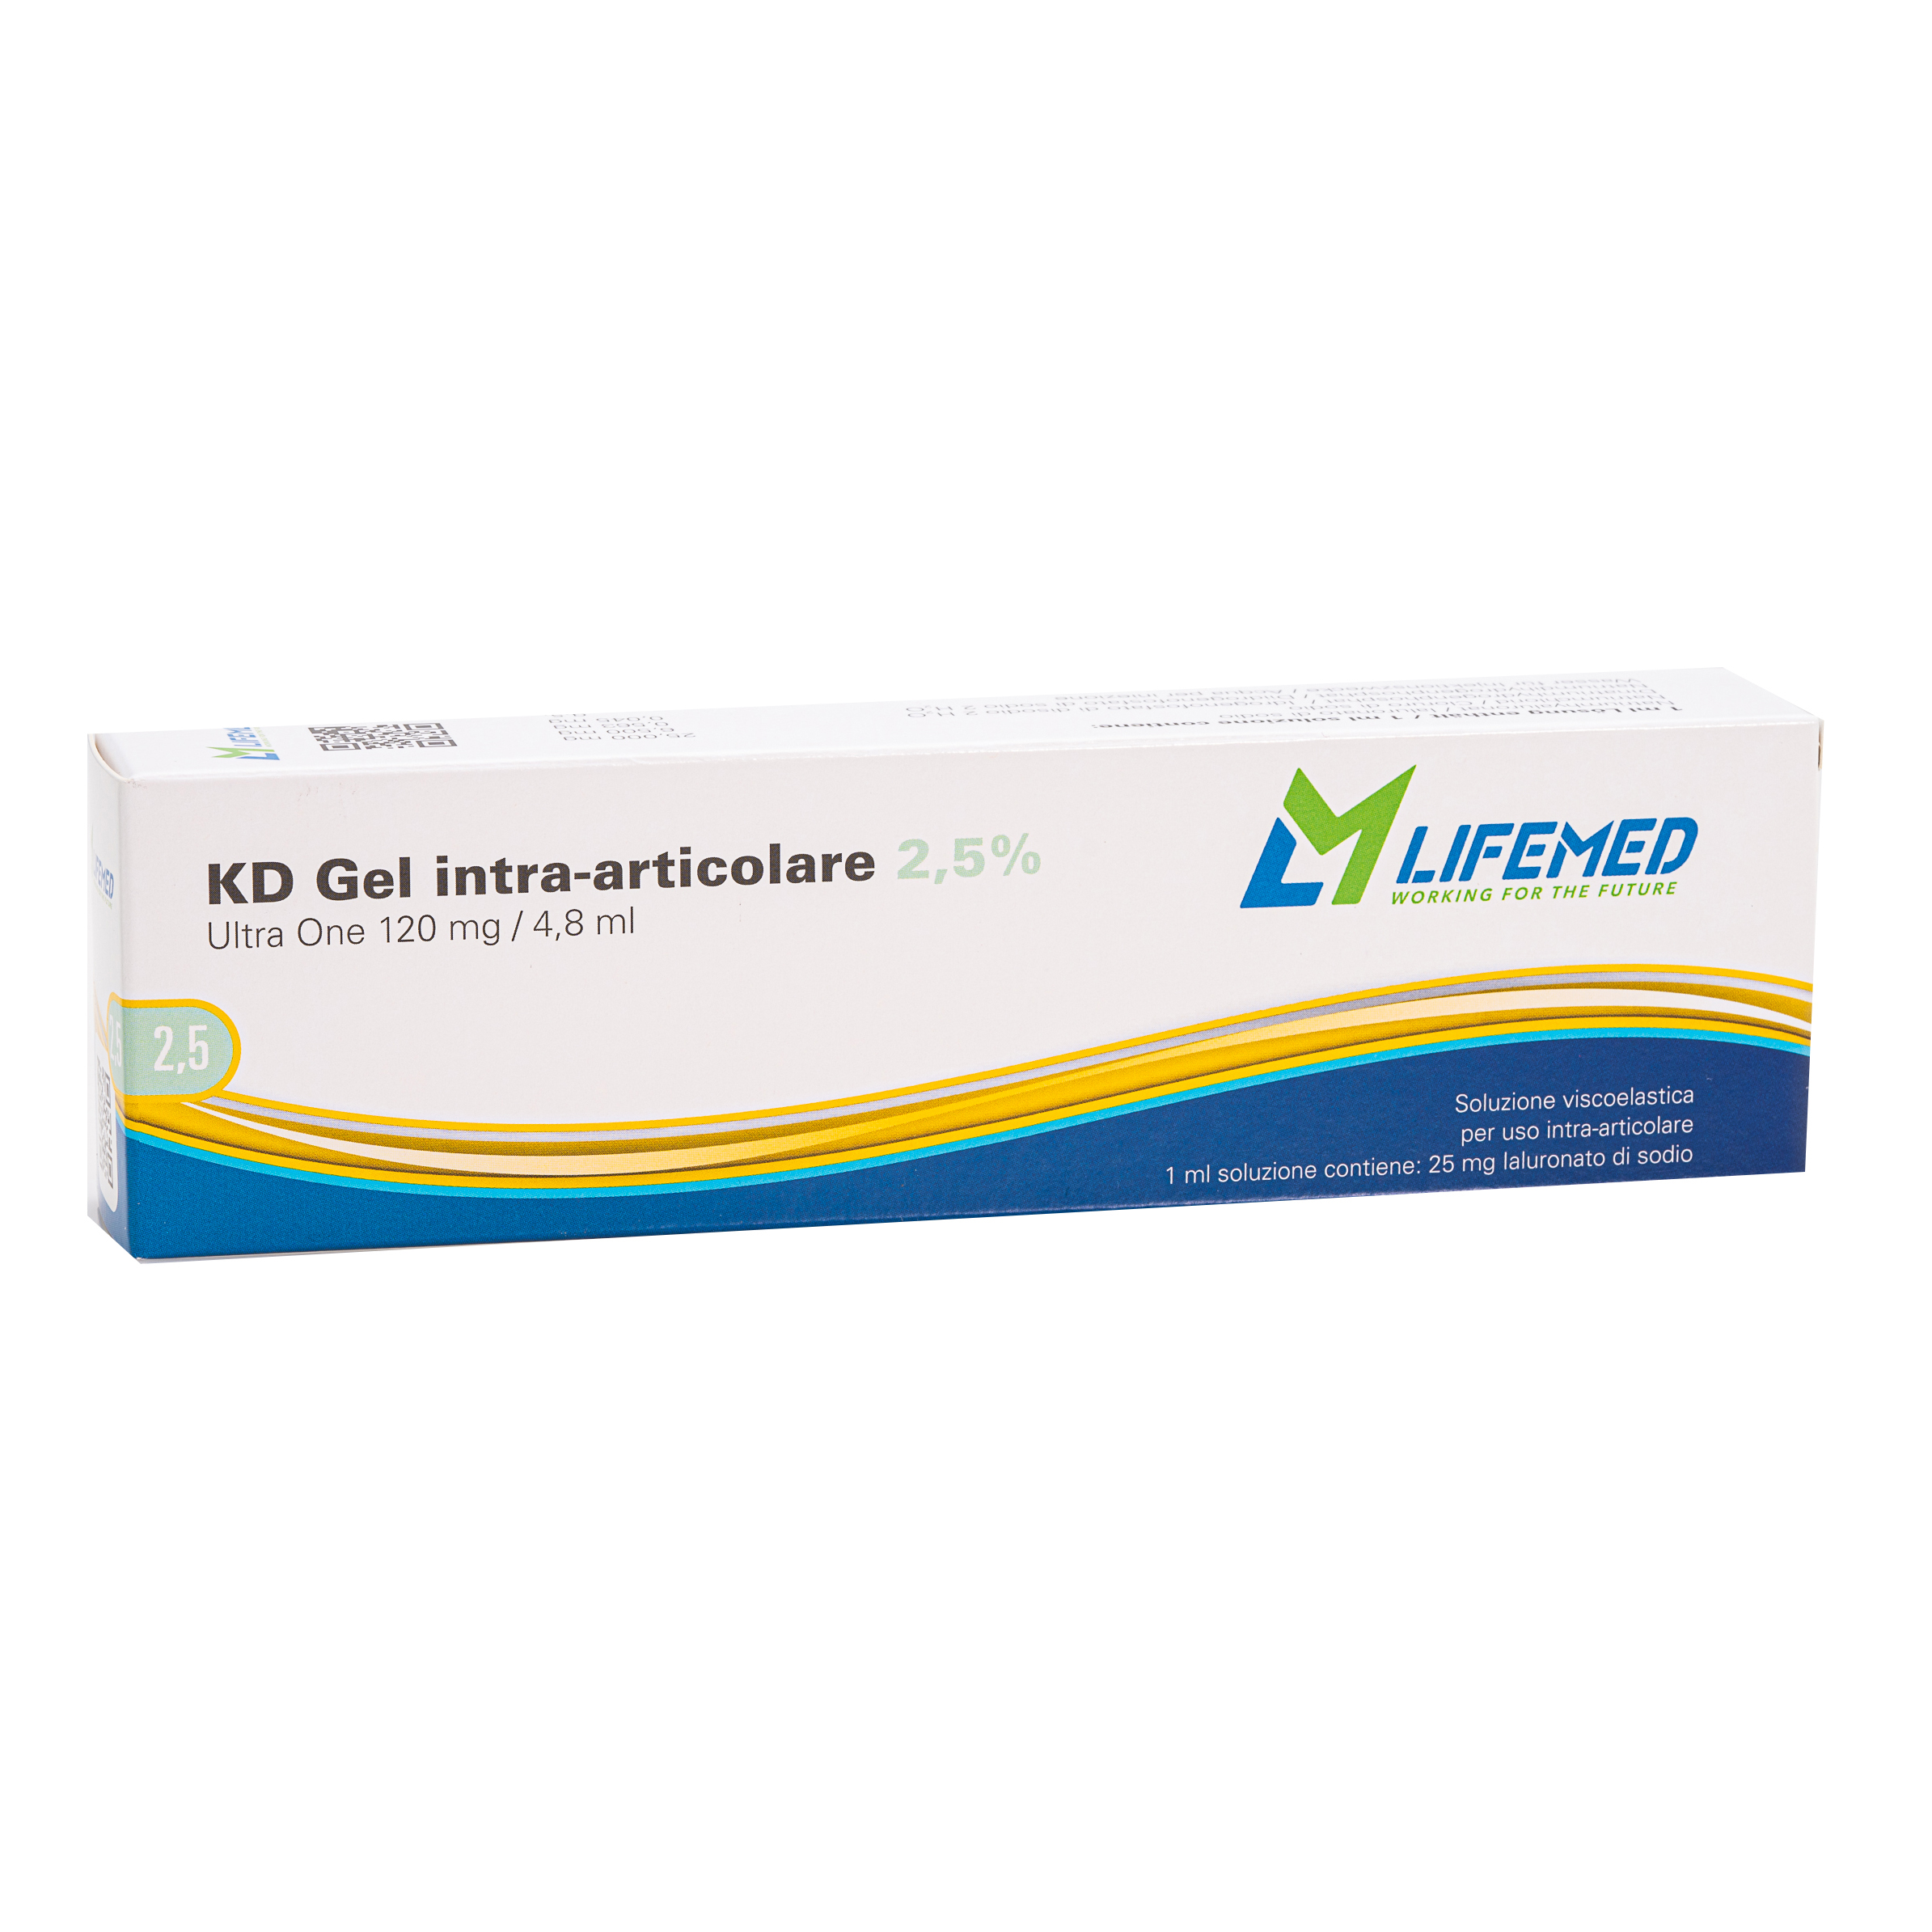 Image of Kd Gel Intra-Articolare 2,5% Ultra One LifeMed 1 Pezzo